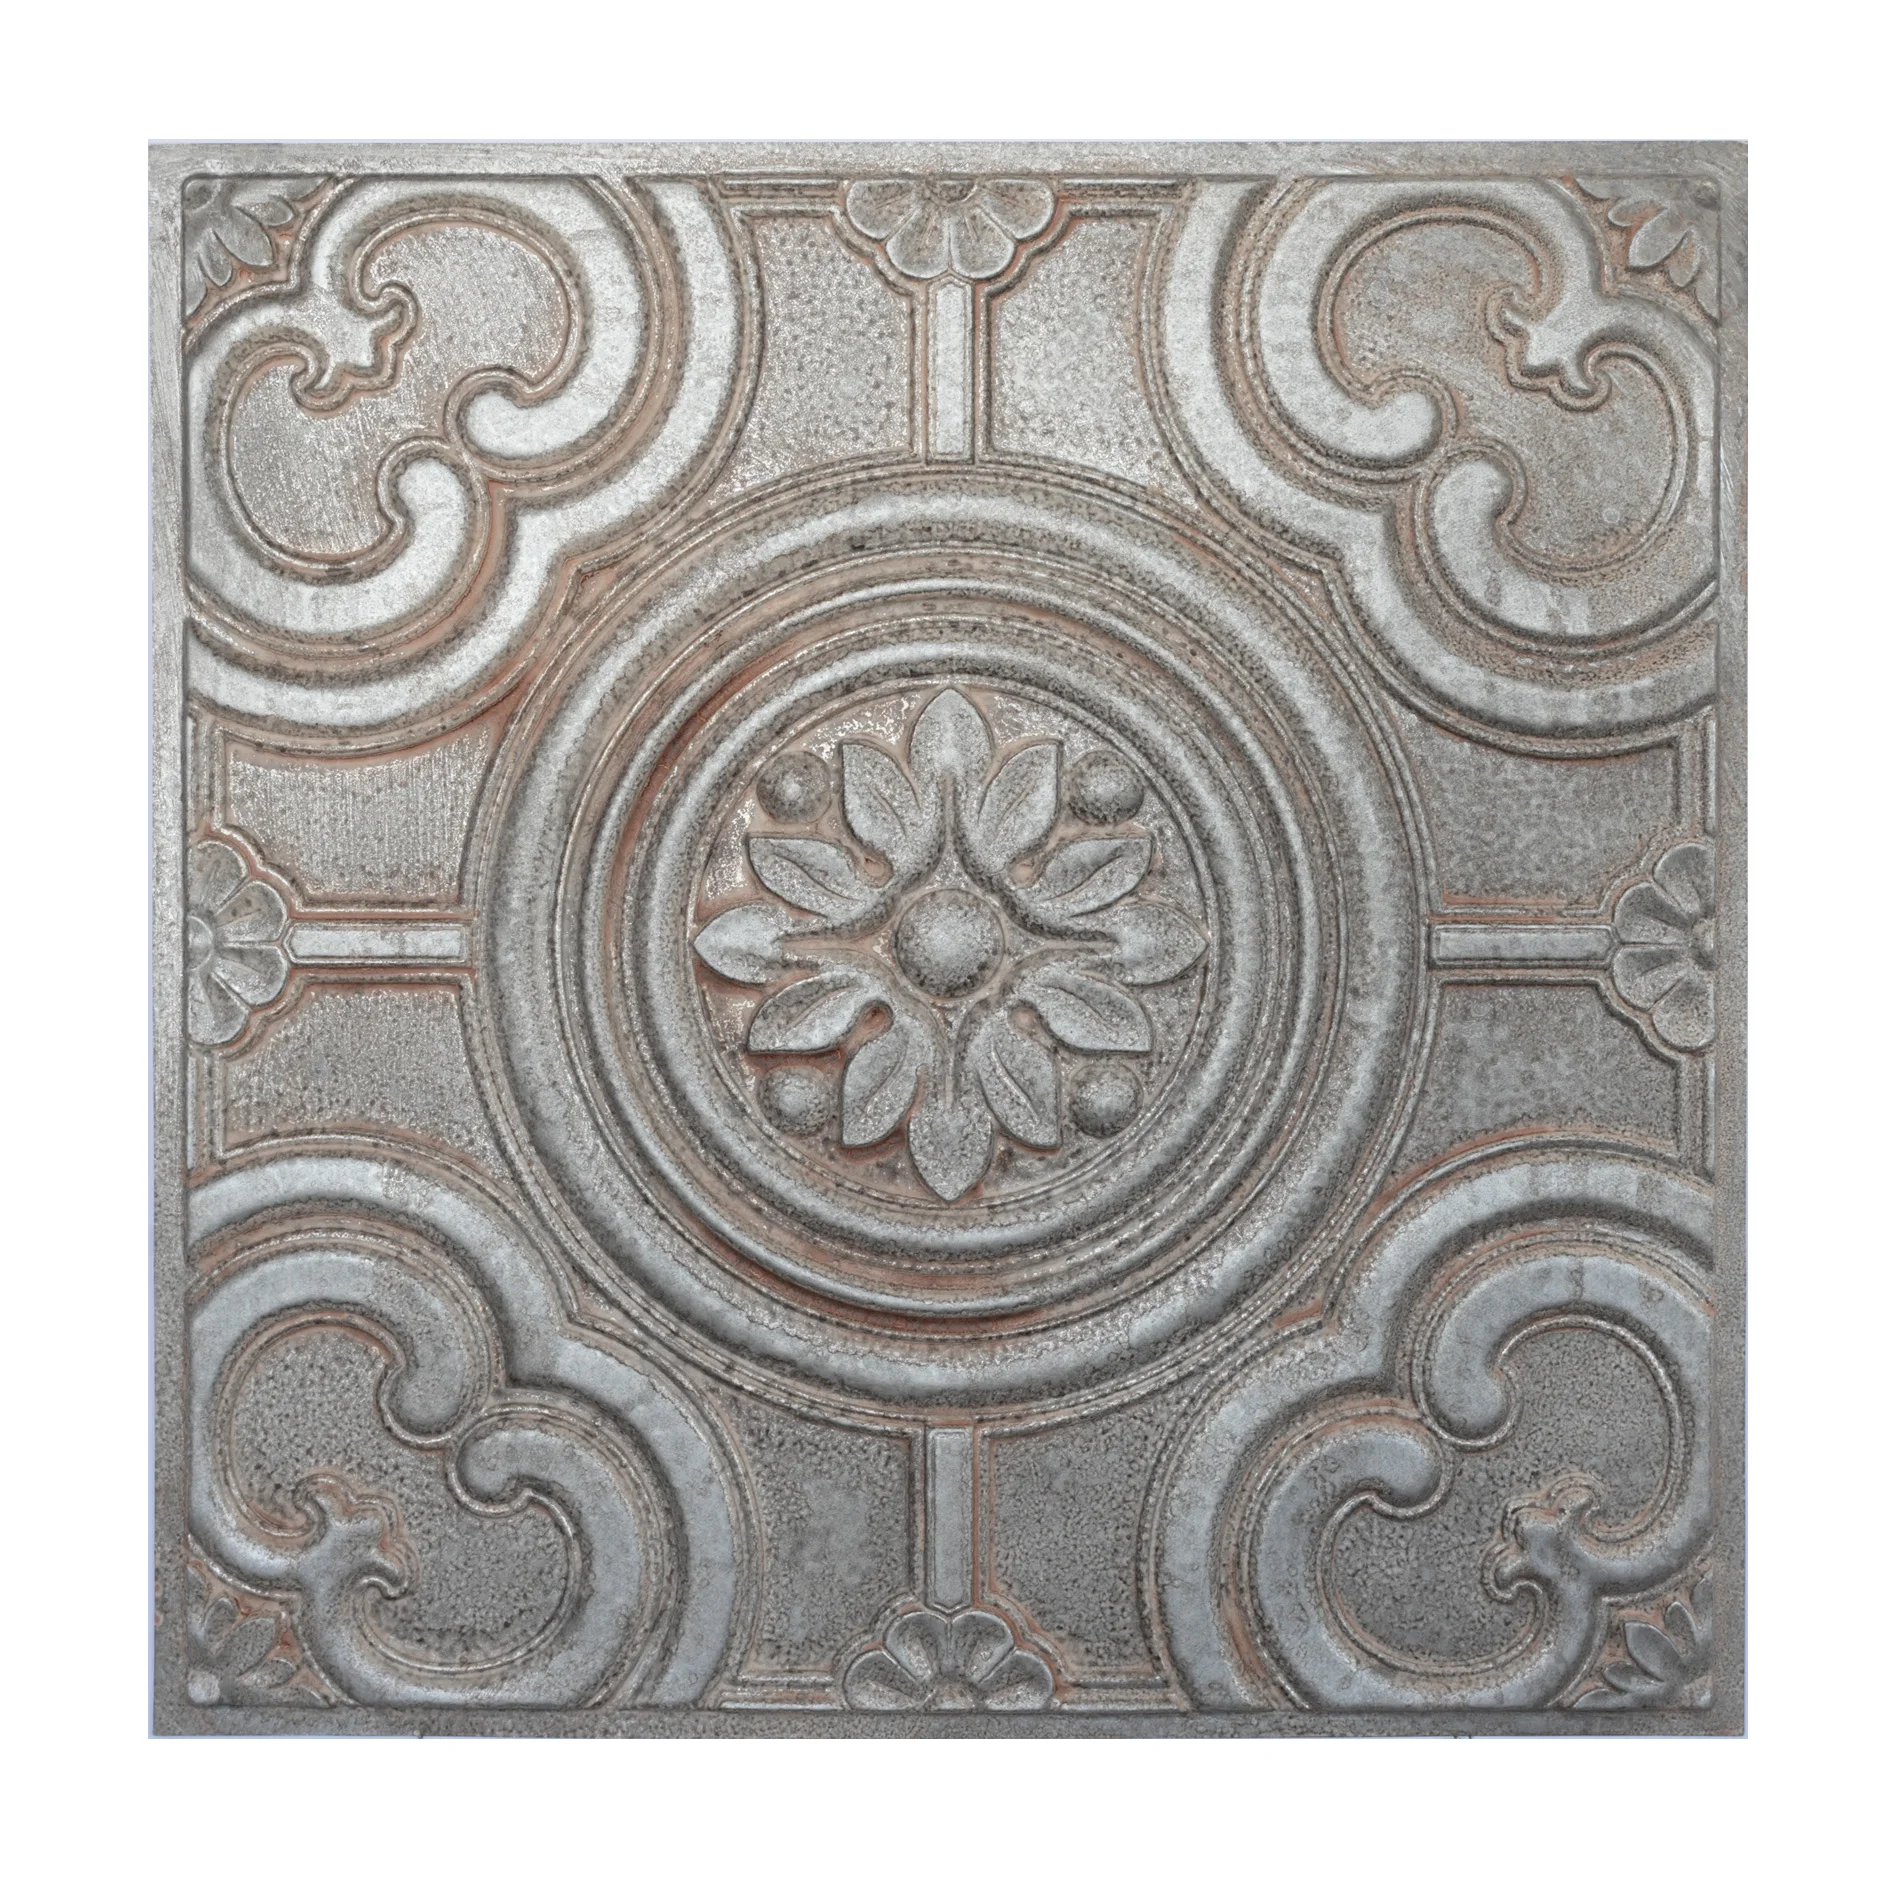 Faux painting distressing nightclub Ceil tiles Decorative tin wall tile Easy to Install PVC Panels PL50 weathered iron